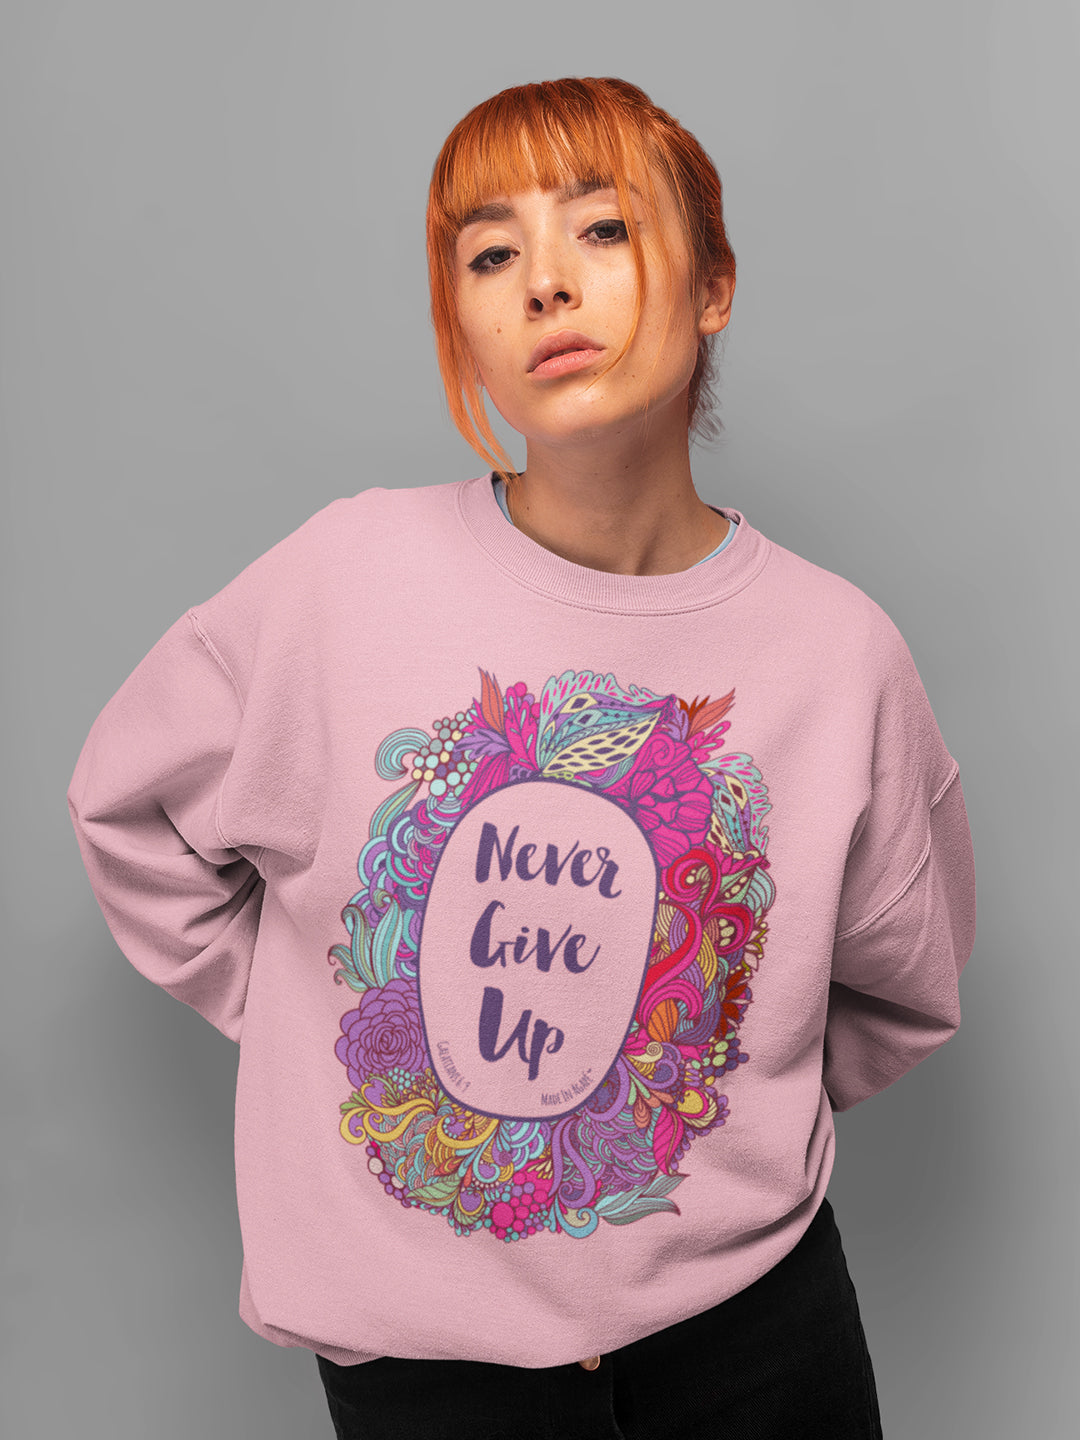 Never Give Up - Women's Sweatshirt-Made In Agapé